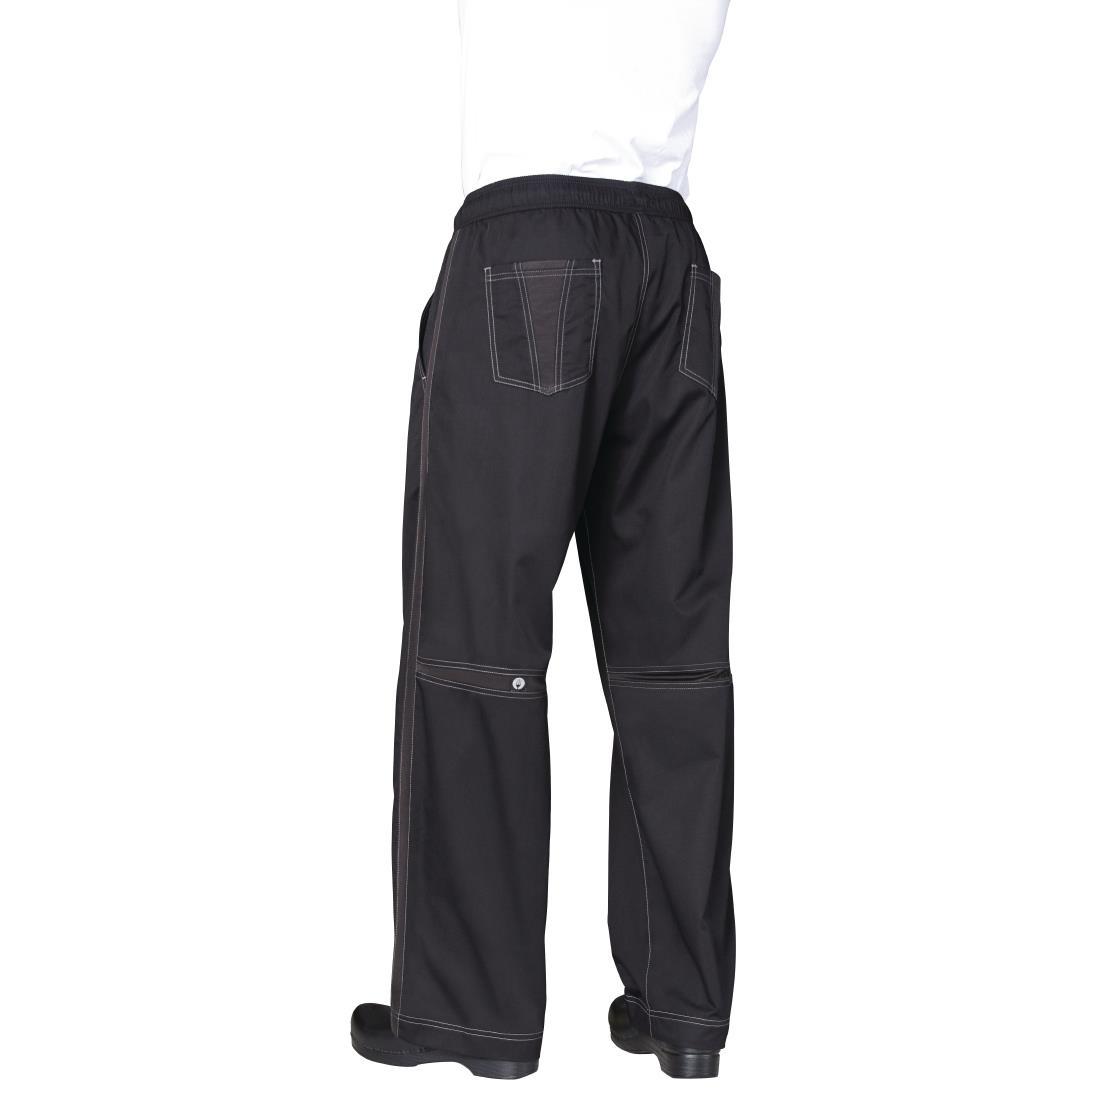 Chef Works Unisex Cool Vent Baggy Chefs Trousers Black 2XL - B187-XXL  - 2